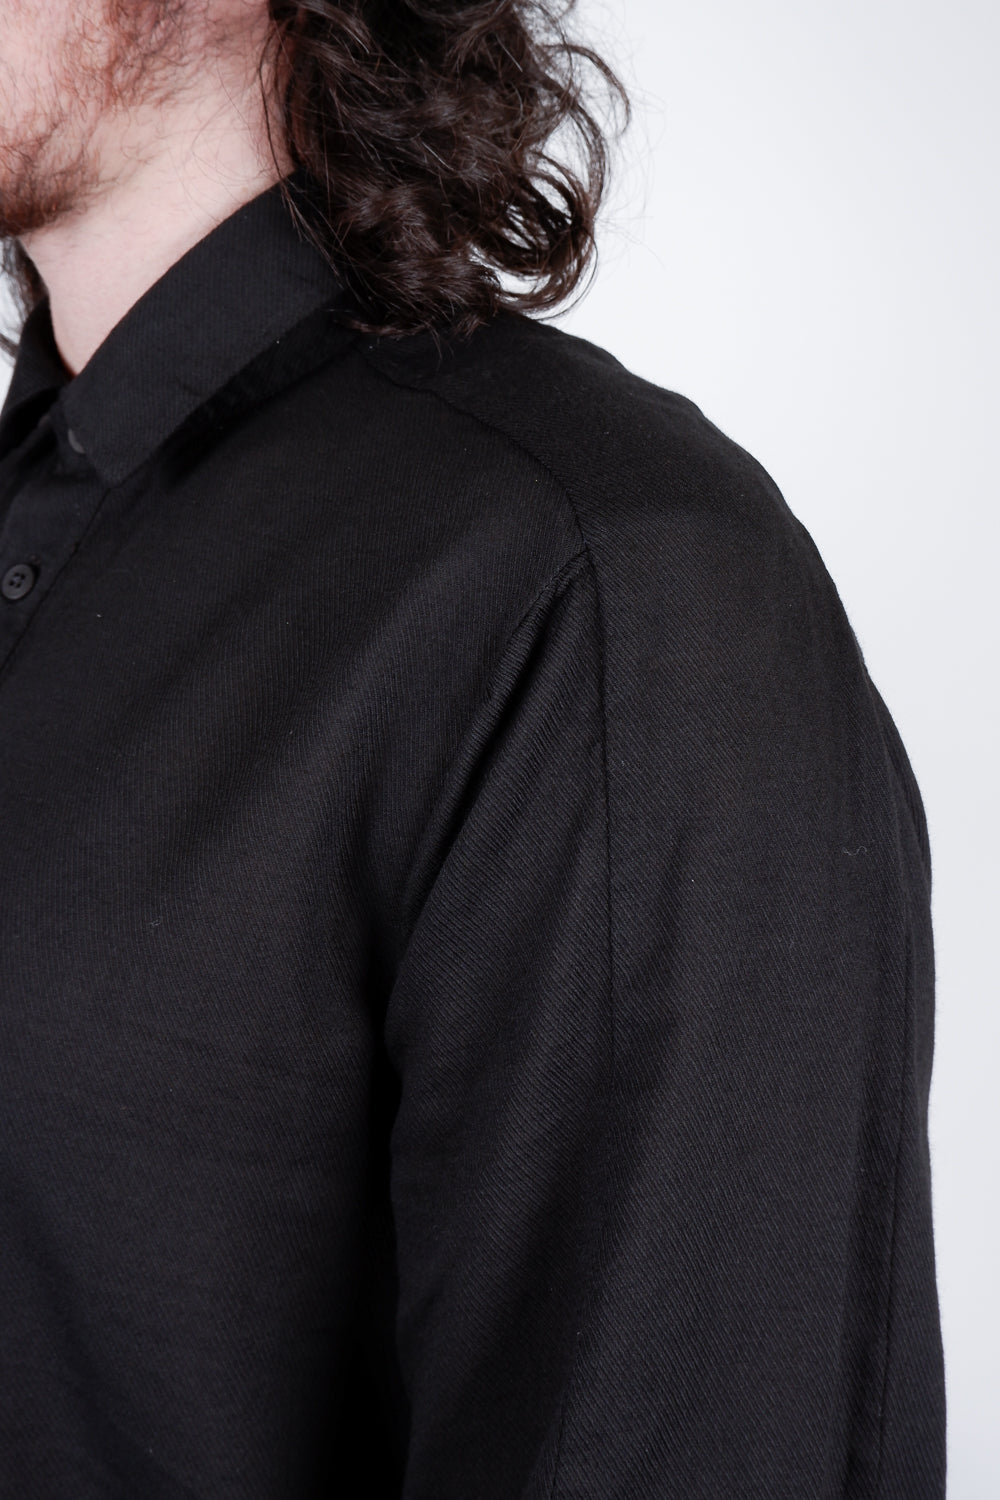 Buy the Transit Wool/Cashmere Regular Fit Shirt in Black at Intro. Spend £50 for free UK delivery. Official stockists. We ship worldwide.